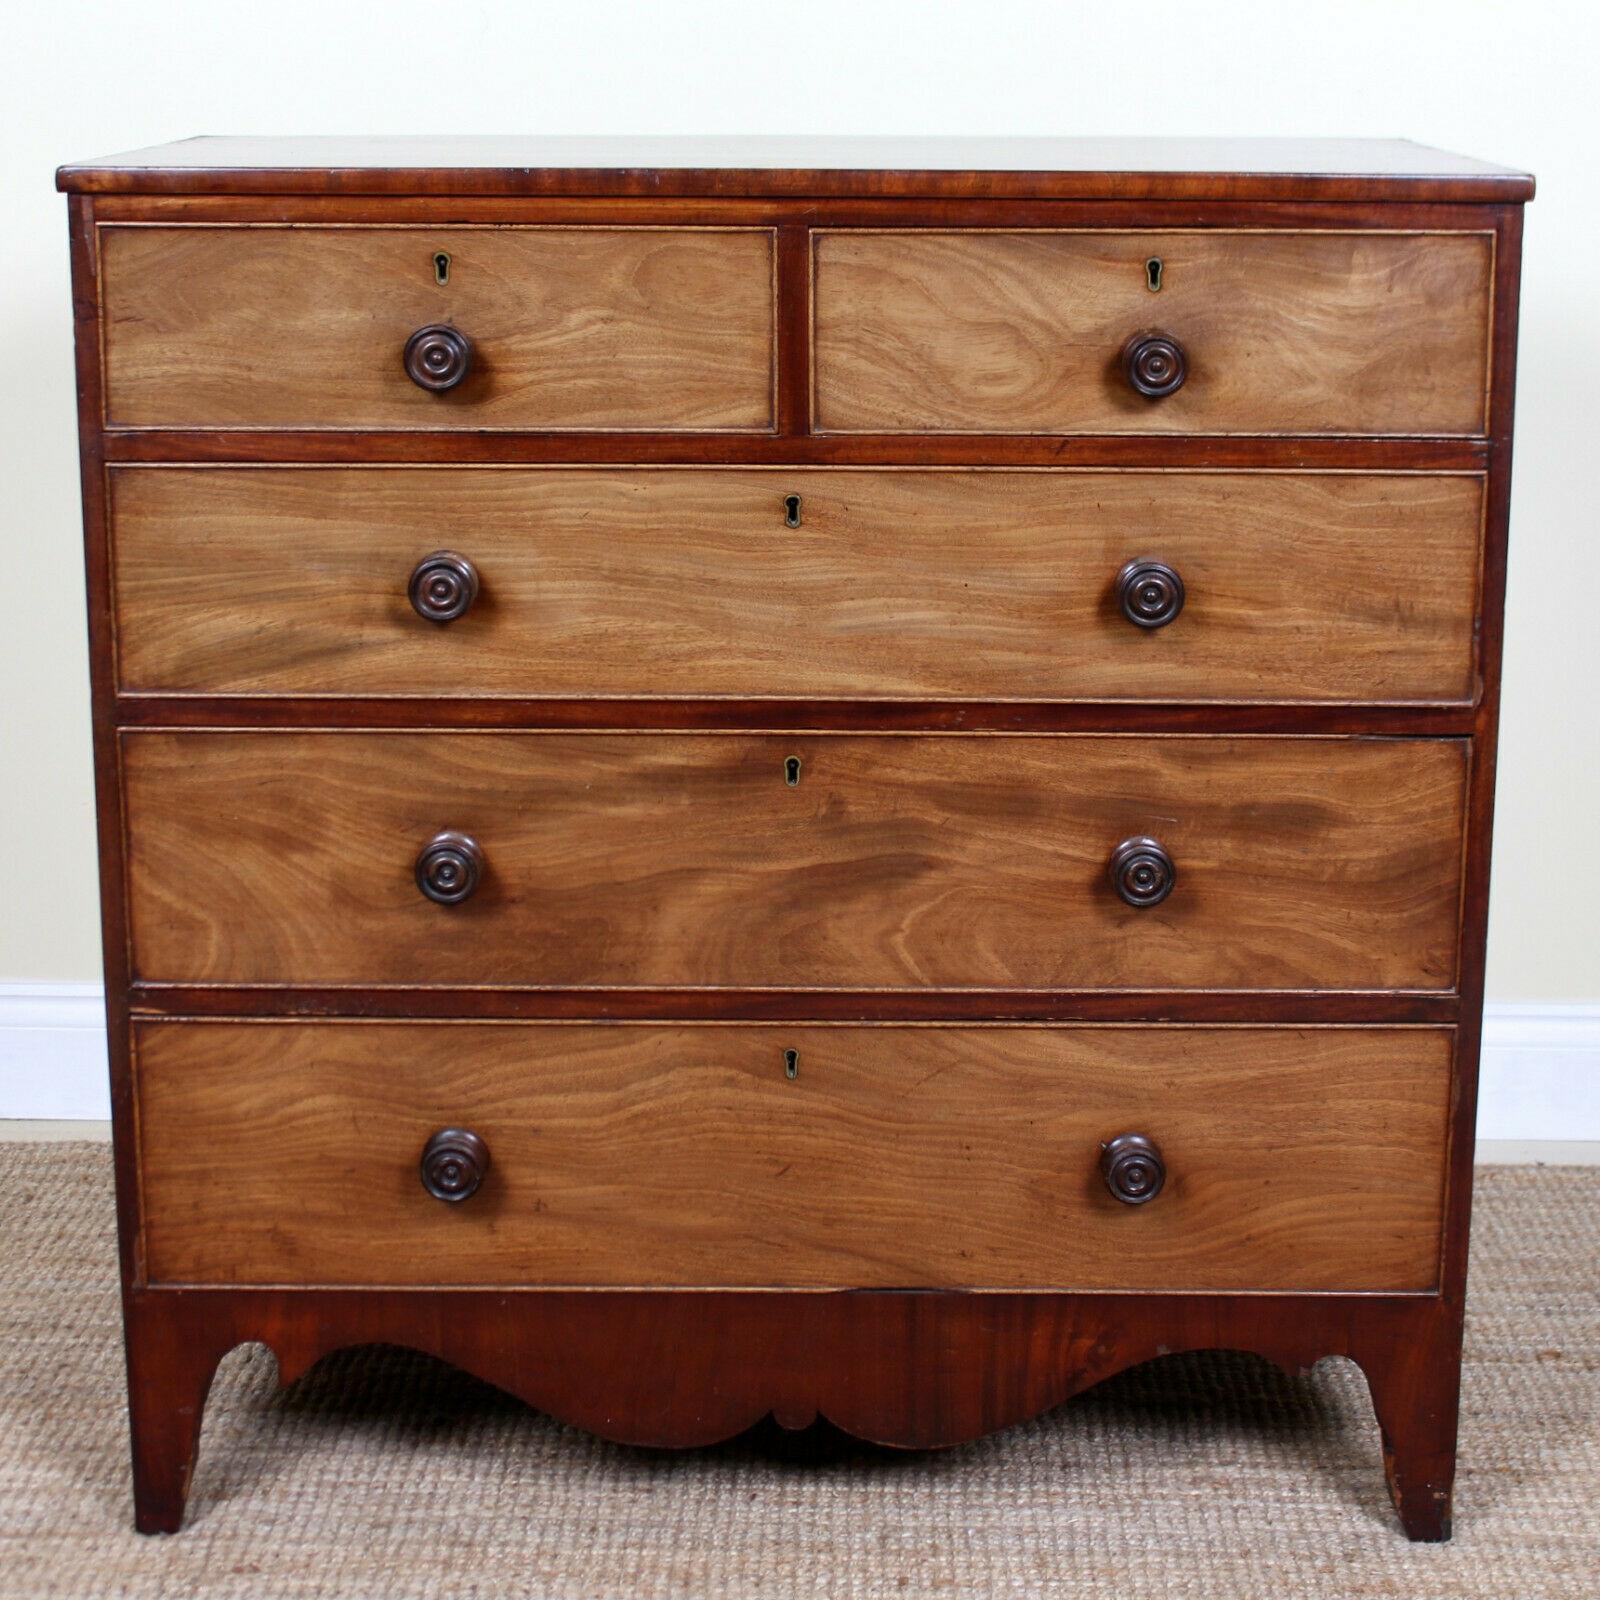 An impressive George IV period mahogany chest of drawers.
The mahogany boasting a well figured flamed grain and rich patina.
Fitted two short and three long graduated drawers with dovetailed jointing, papered interiors and mounted with good